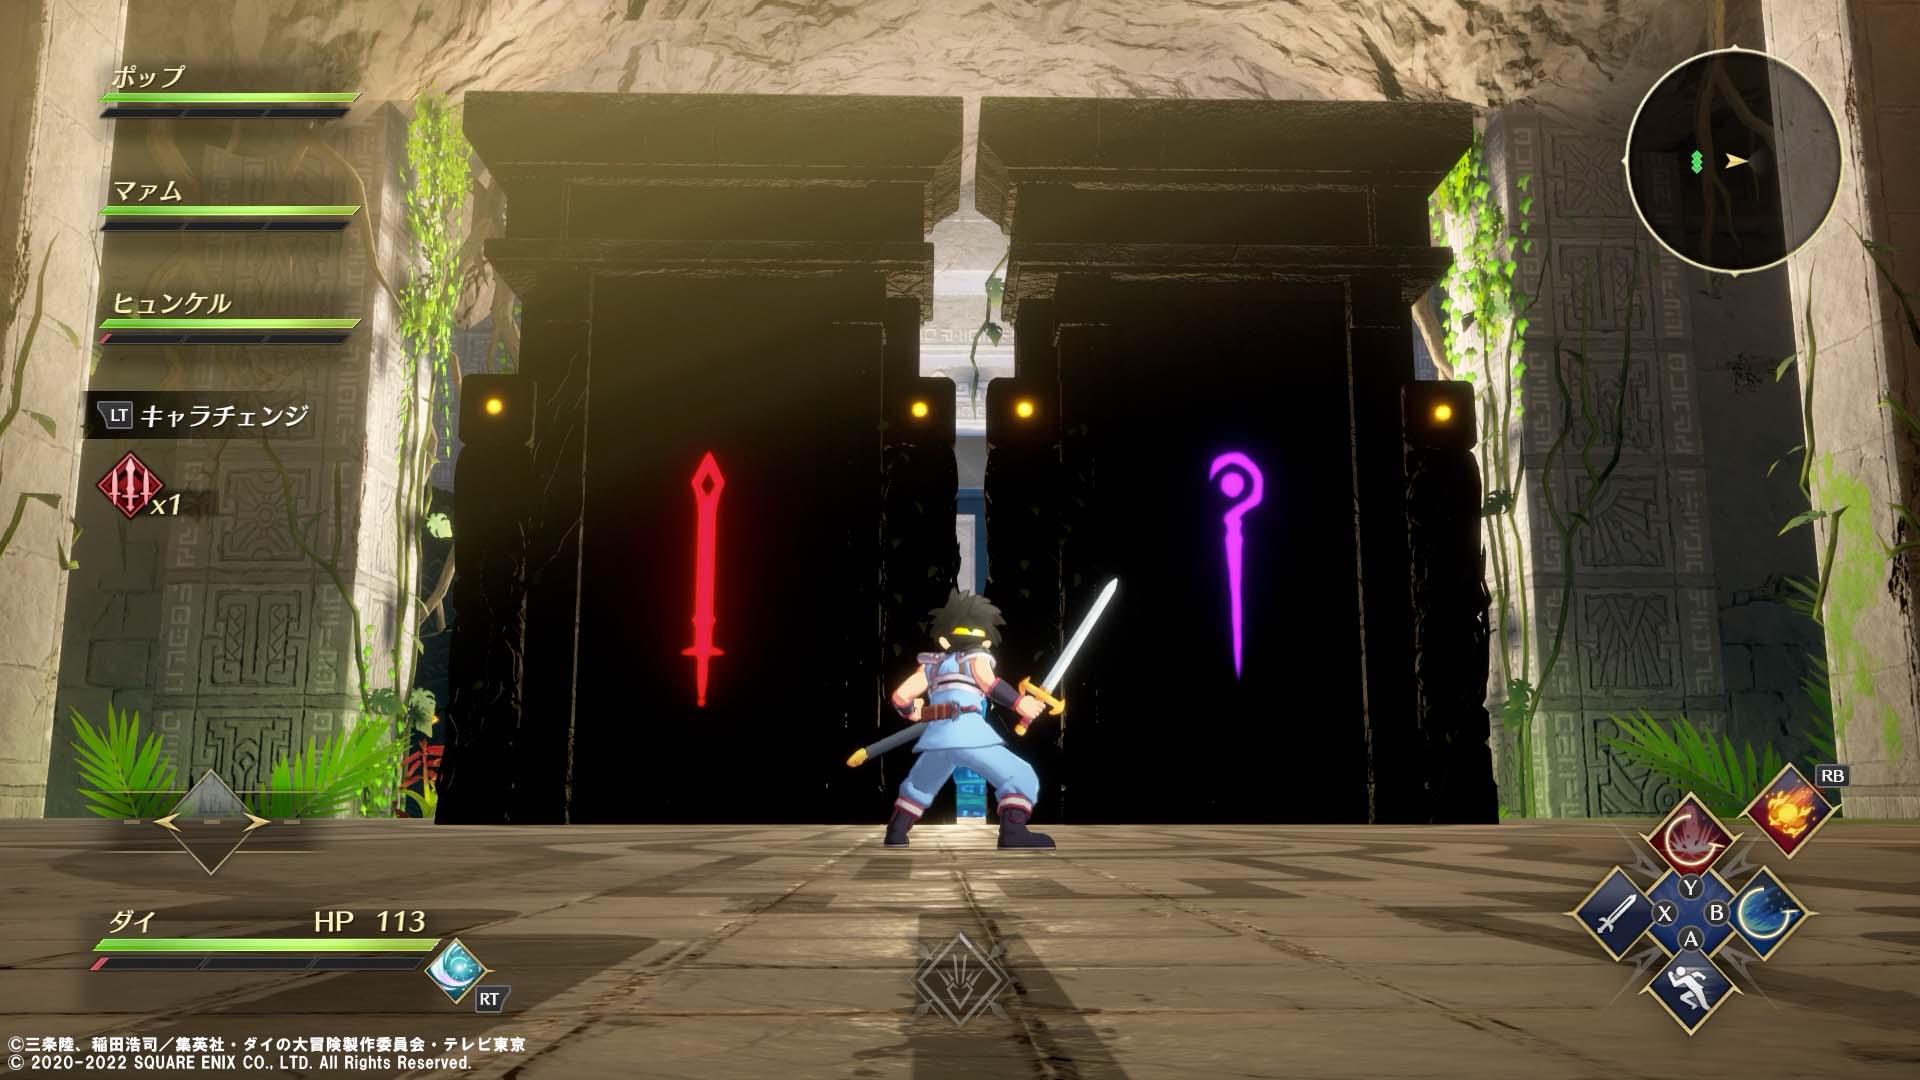 Infinity Strash: Dragon Quest The Adventure of Dai Is The Perfect  Adaptation Of A Beloved Series - Xbox Wire